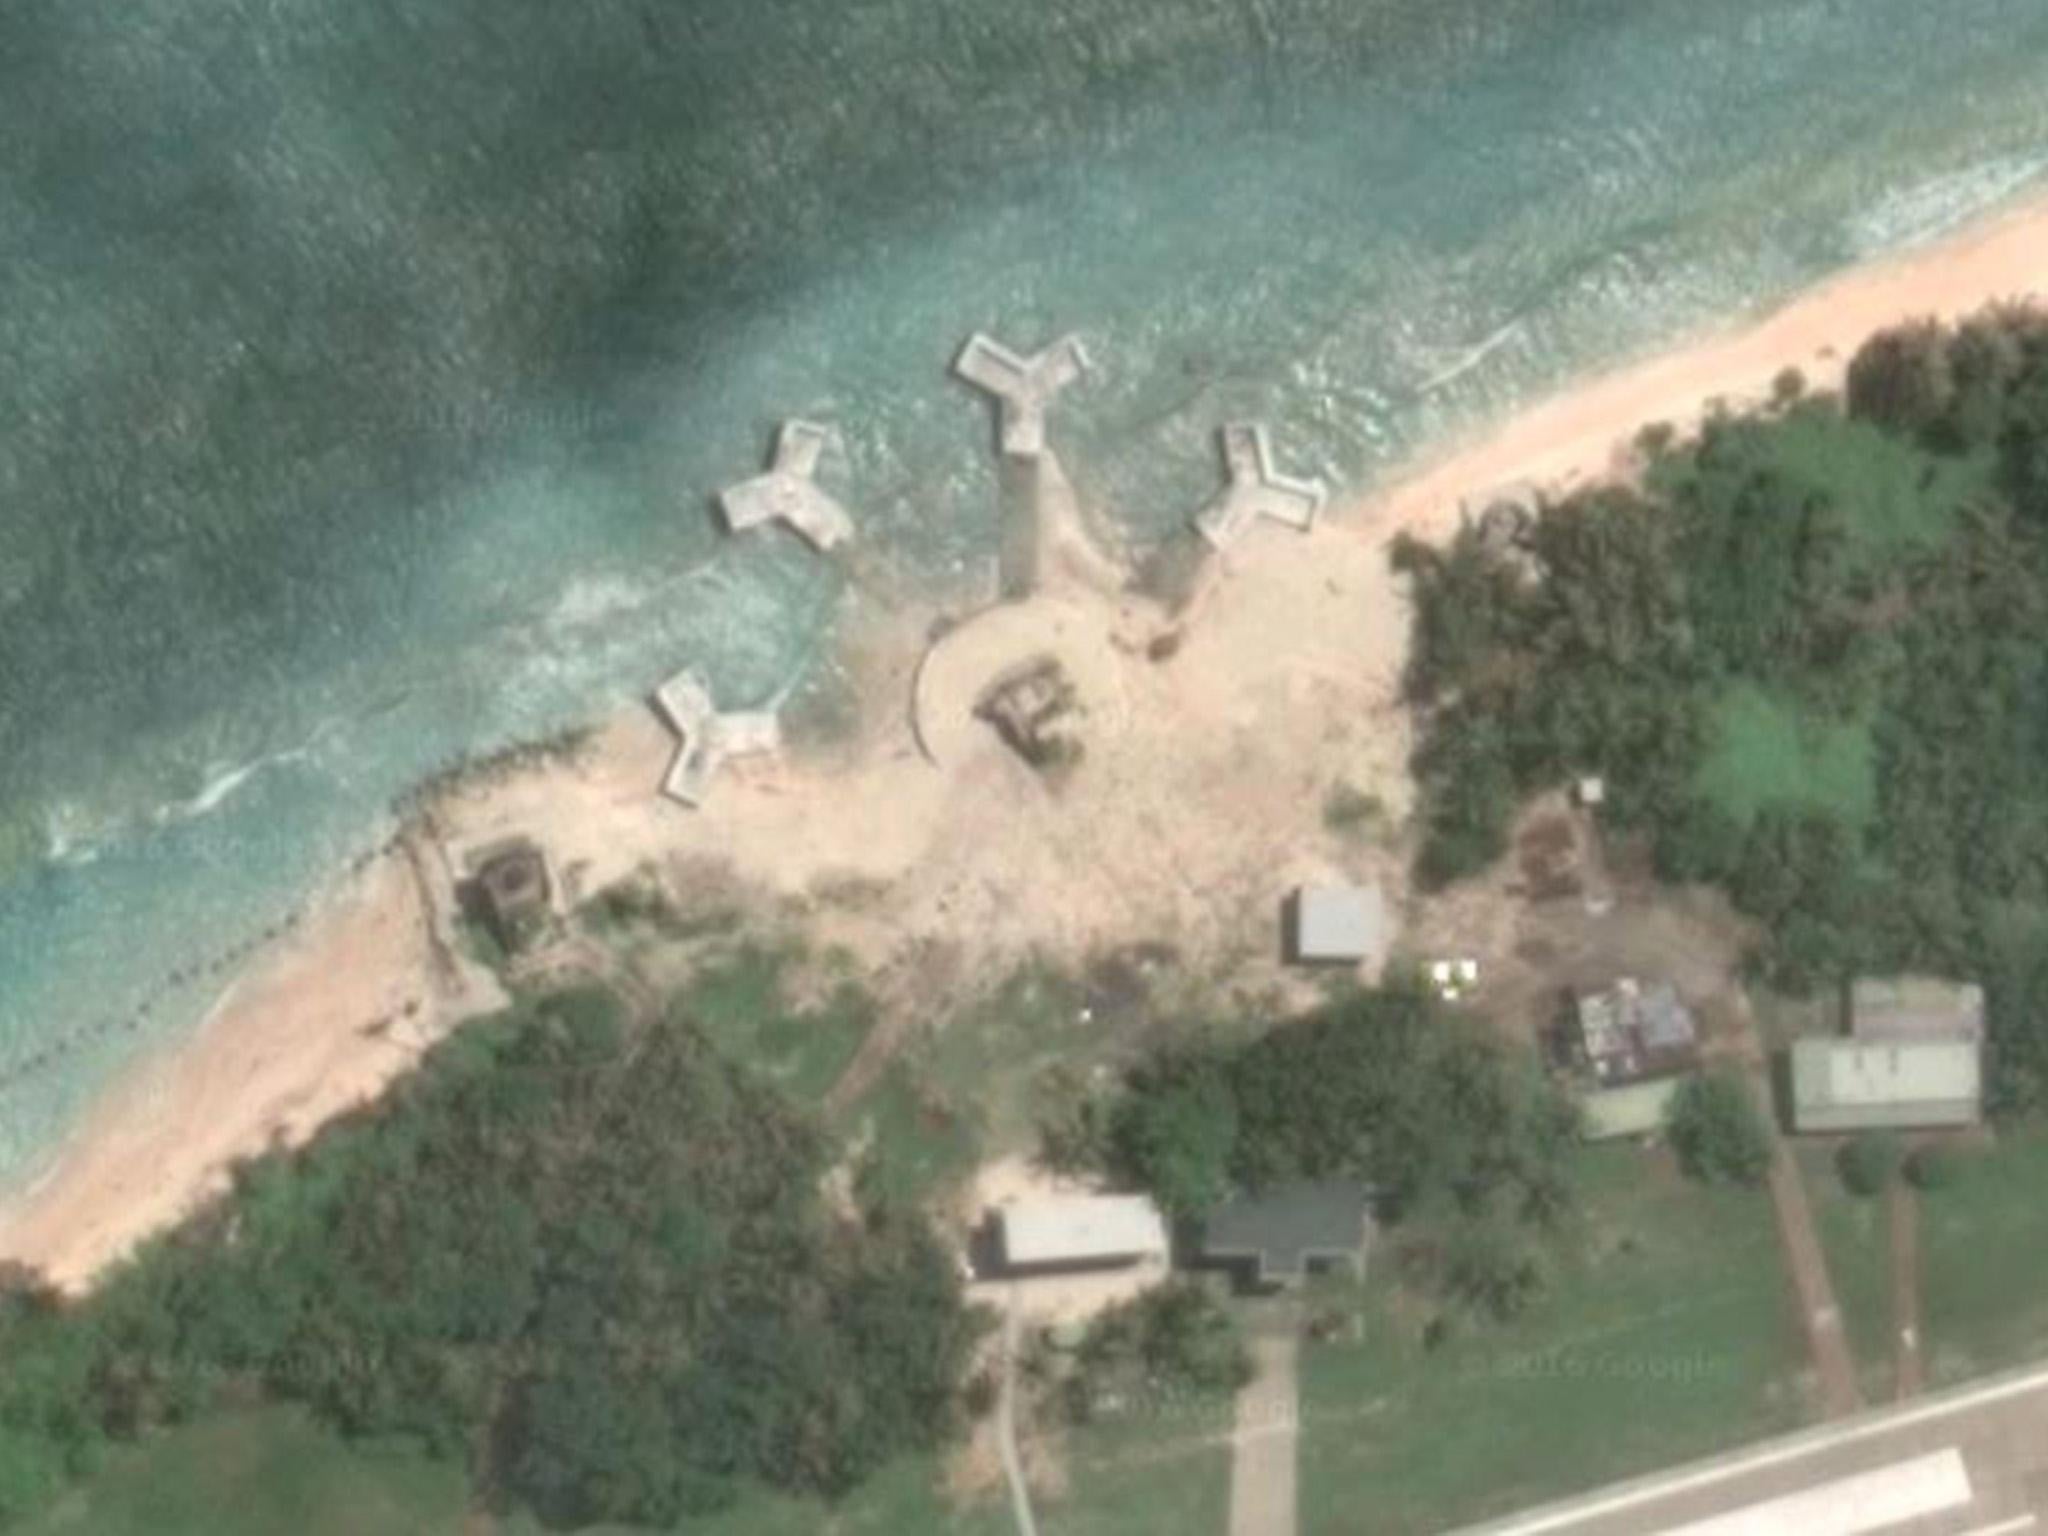 Satellite images show buildings built on one of the disputed Spratly islands